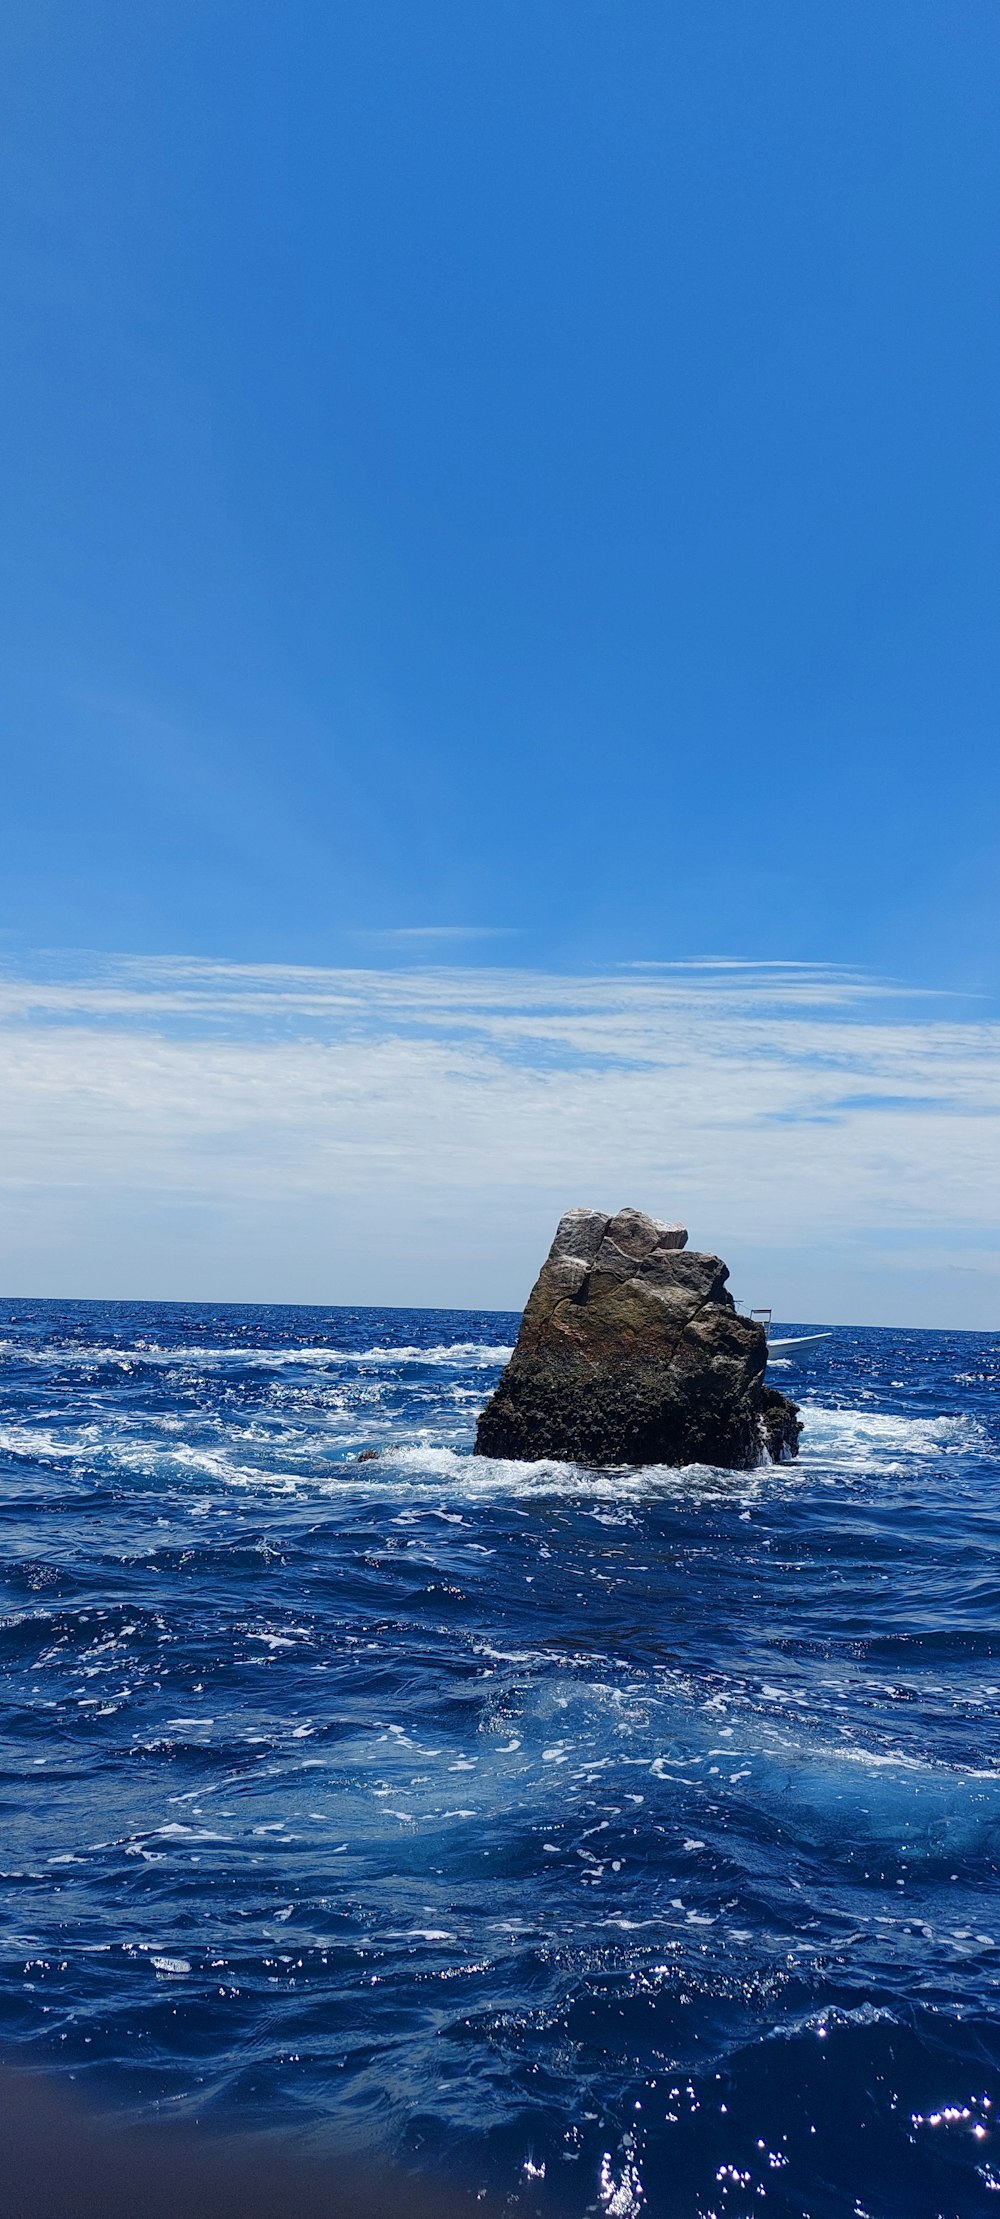 brown rock formation on sea under blue sky during daytime